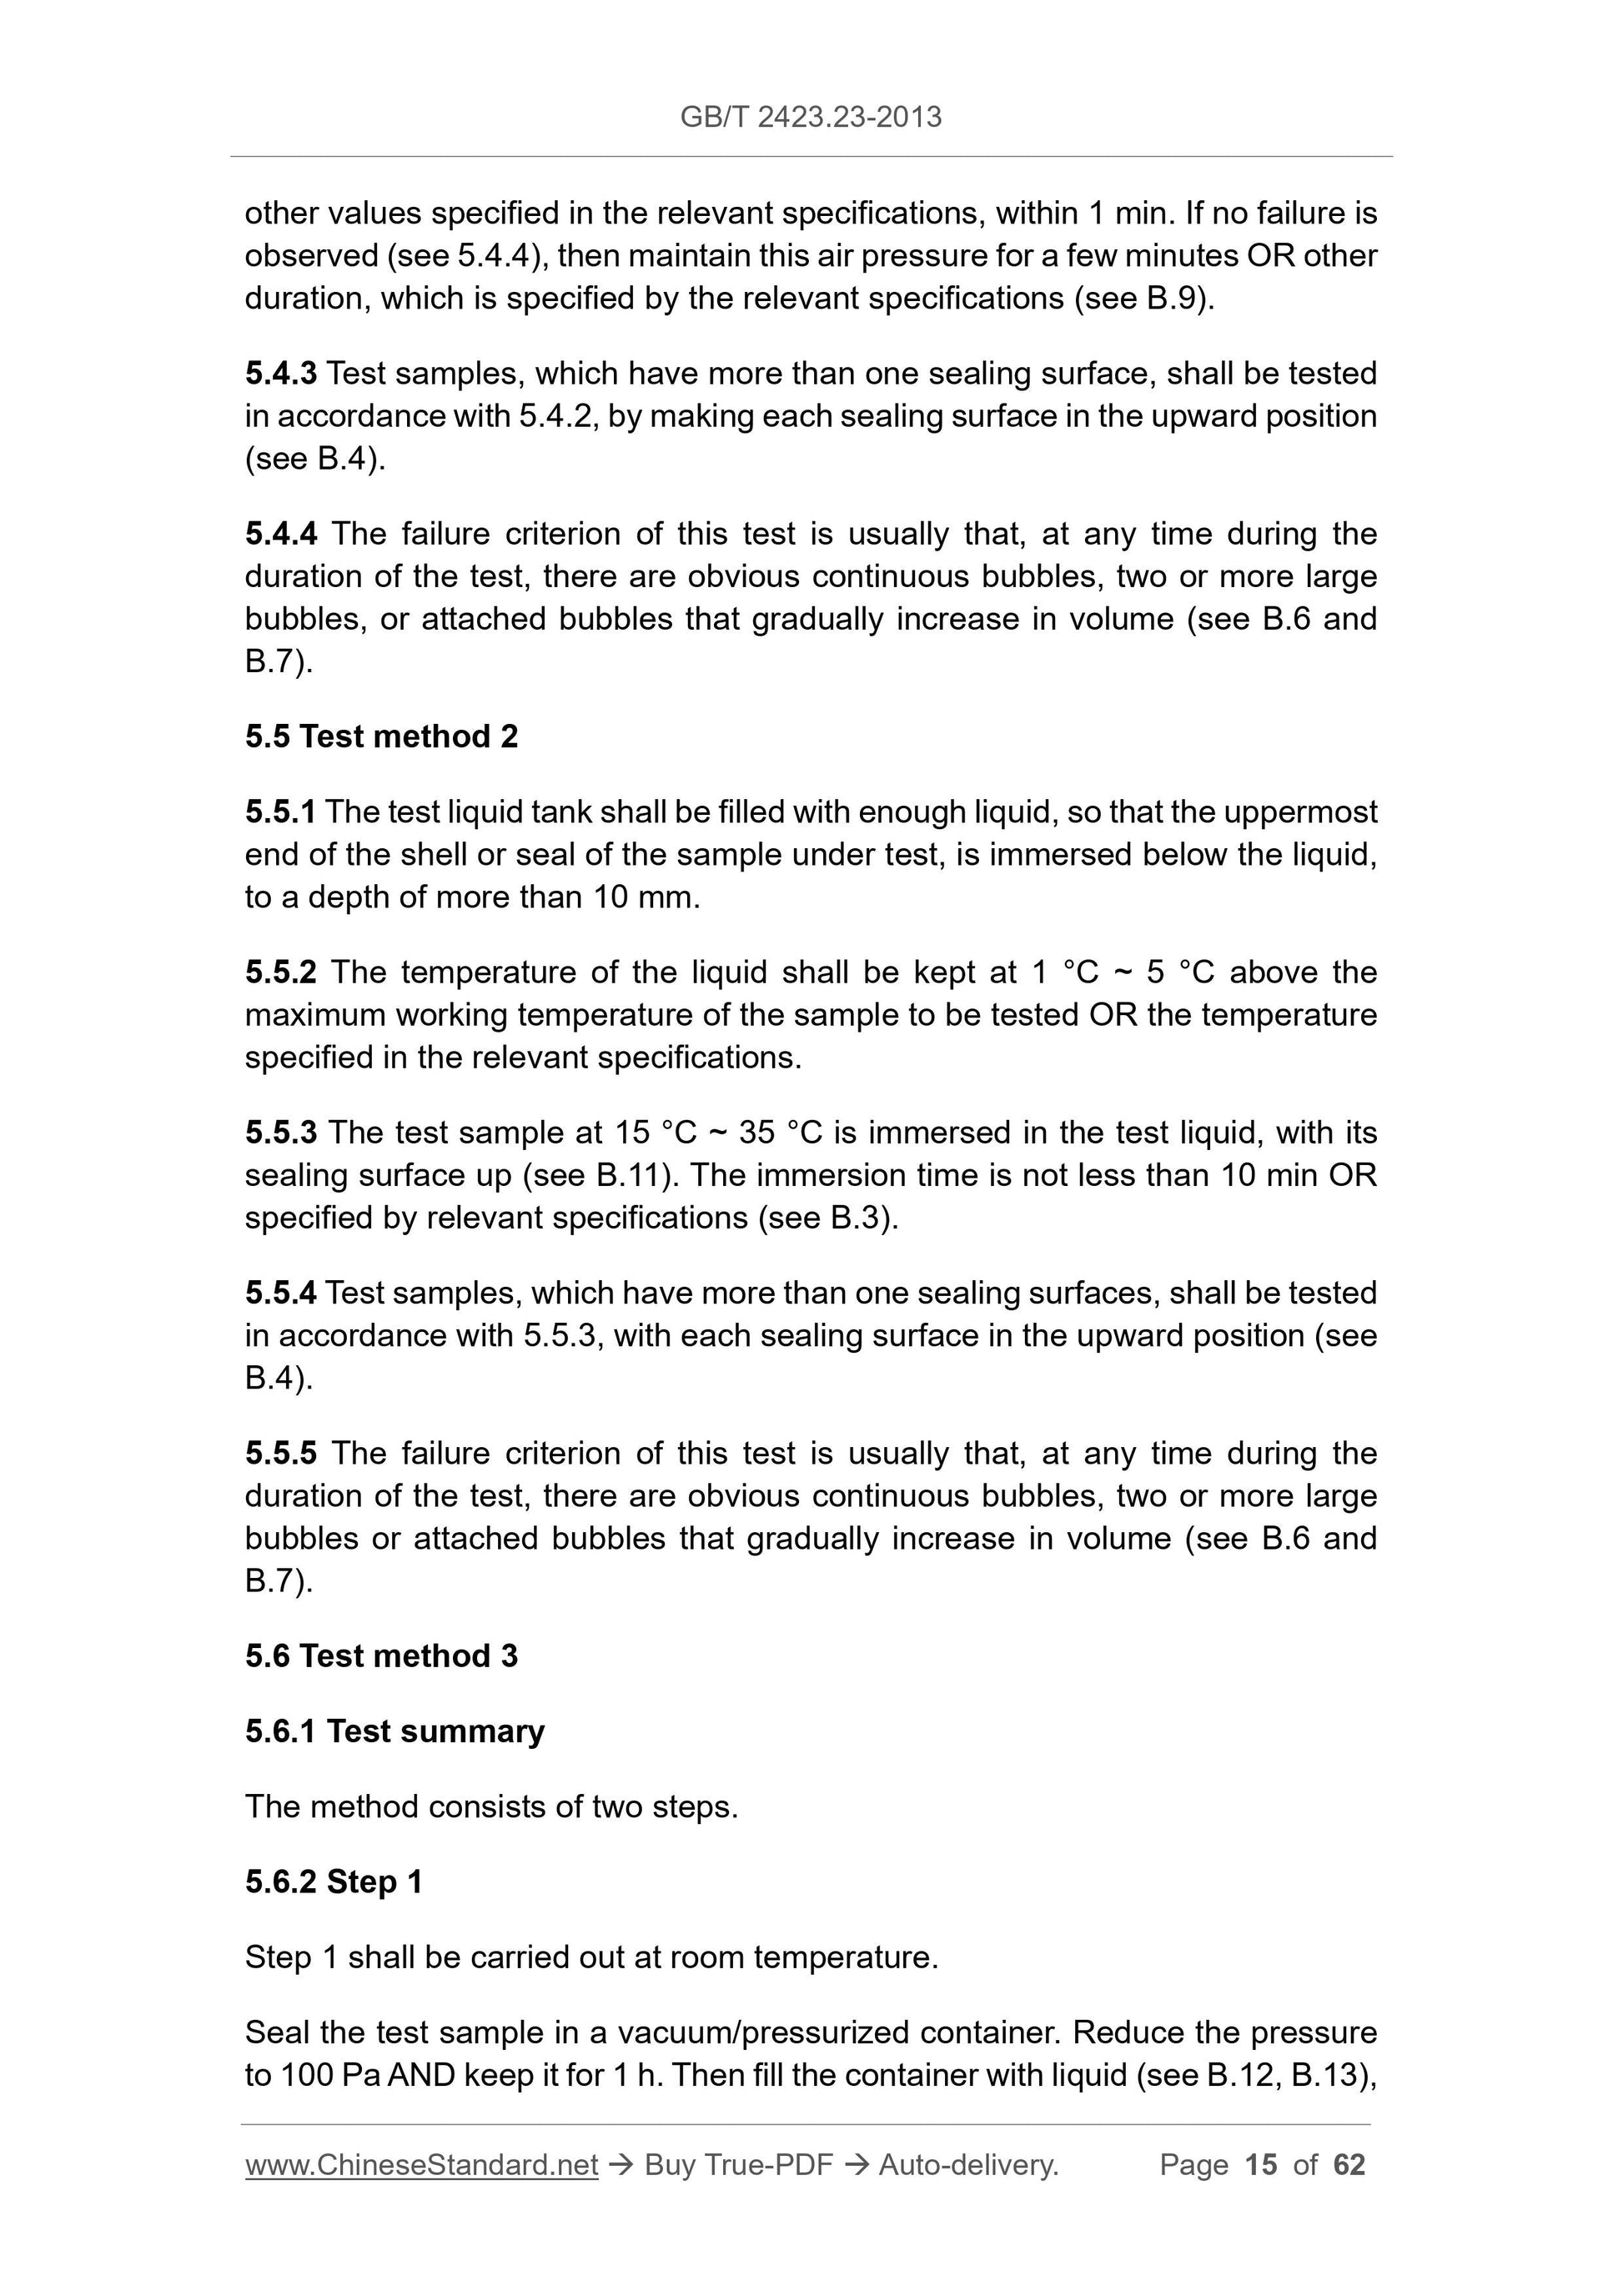 GB/T 2423.23-2013 Page 5